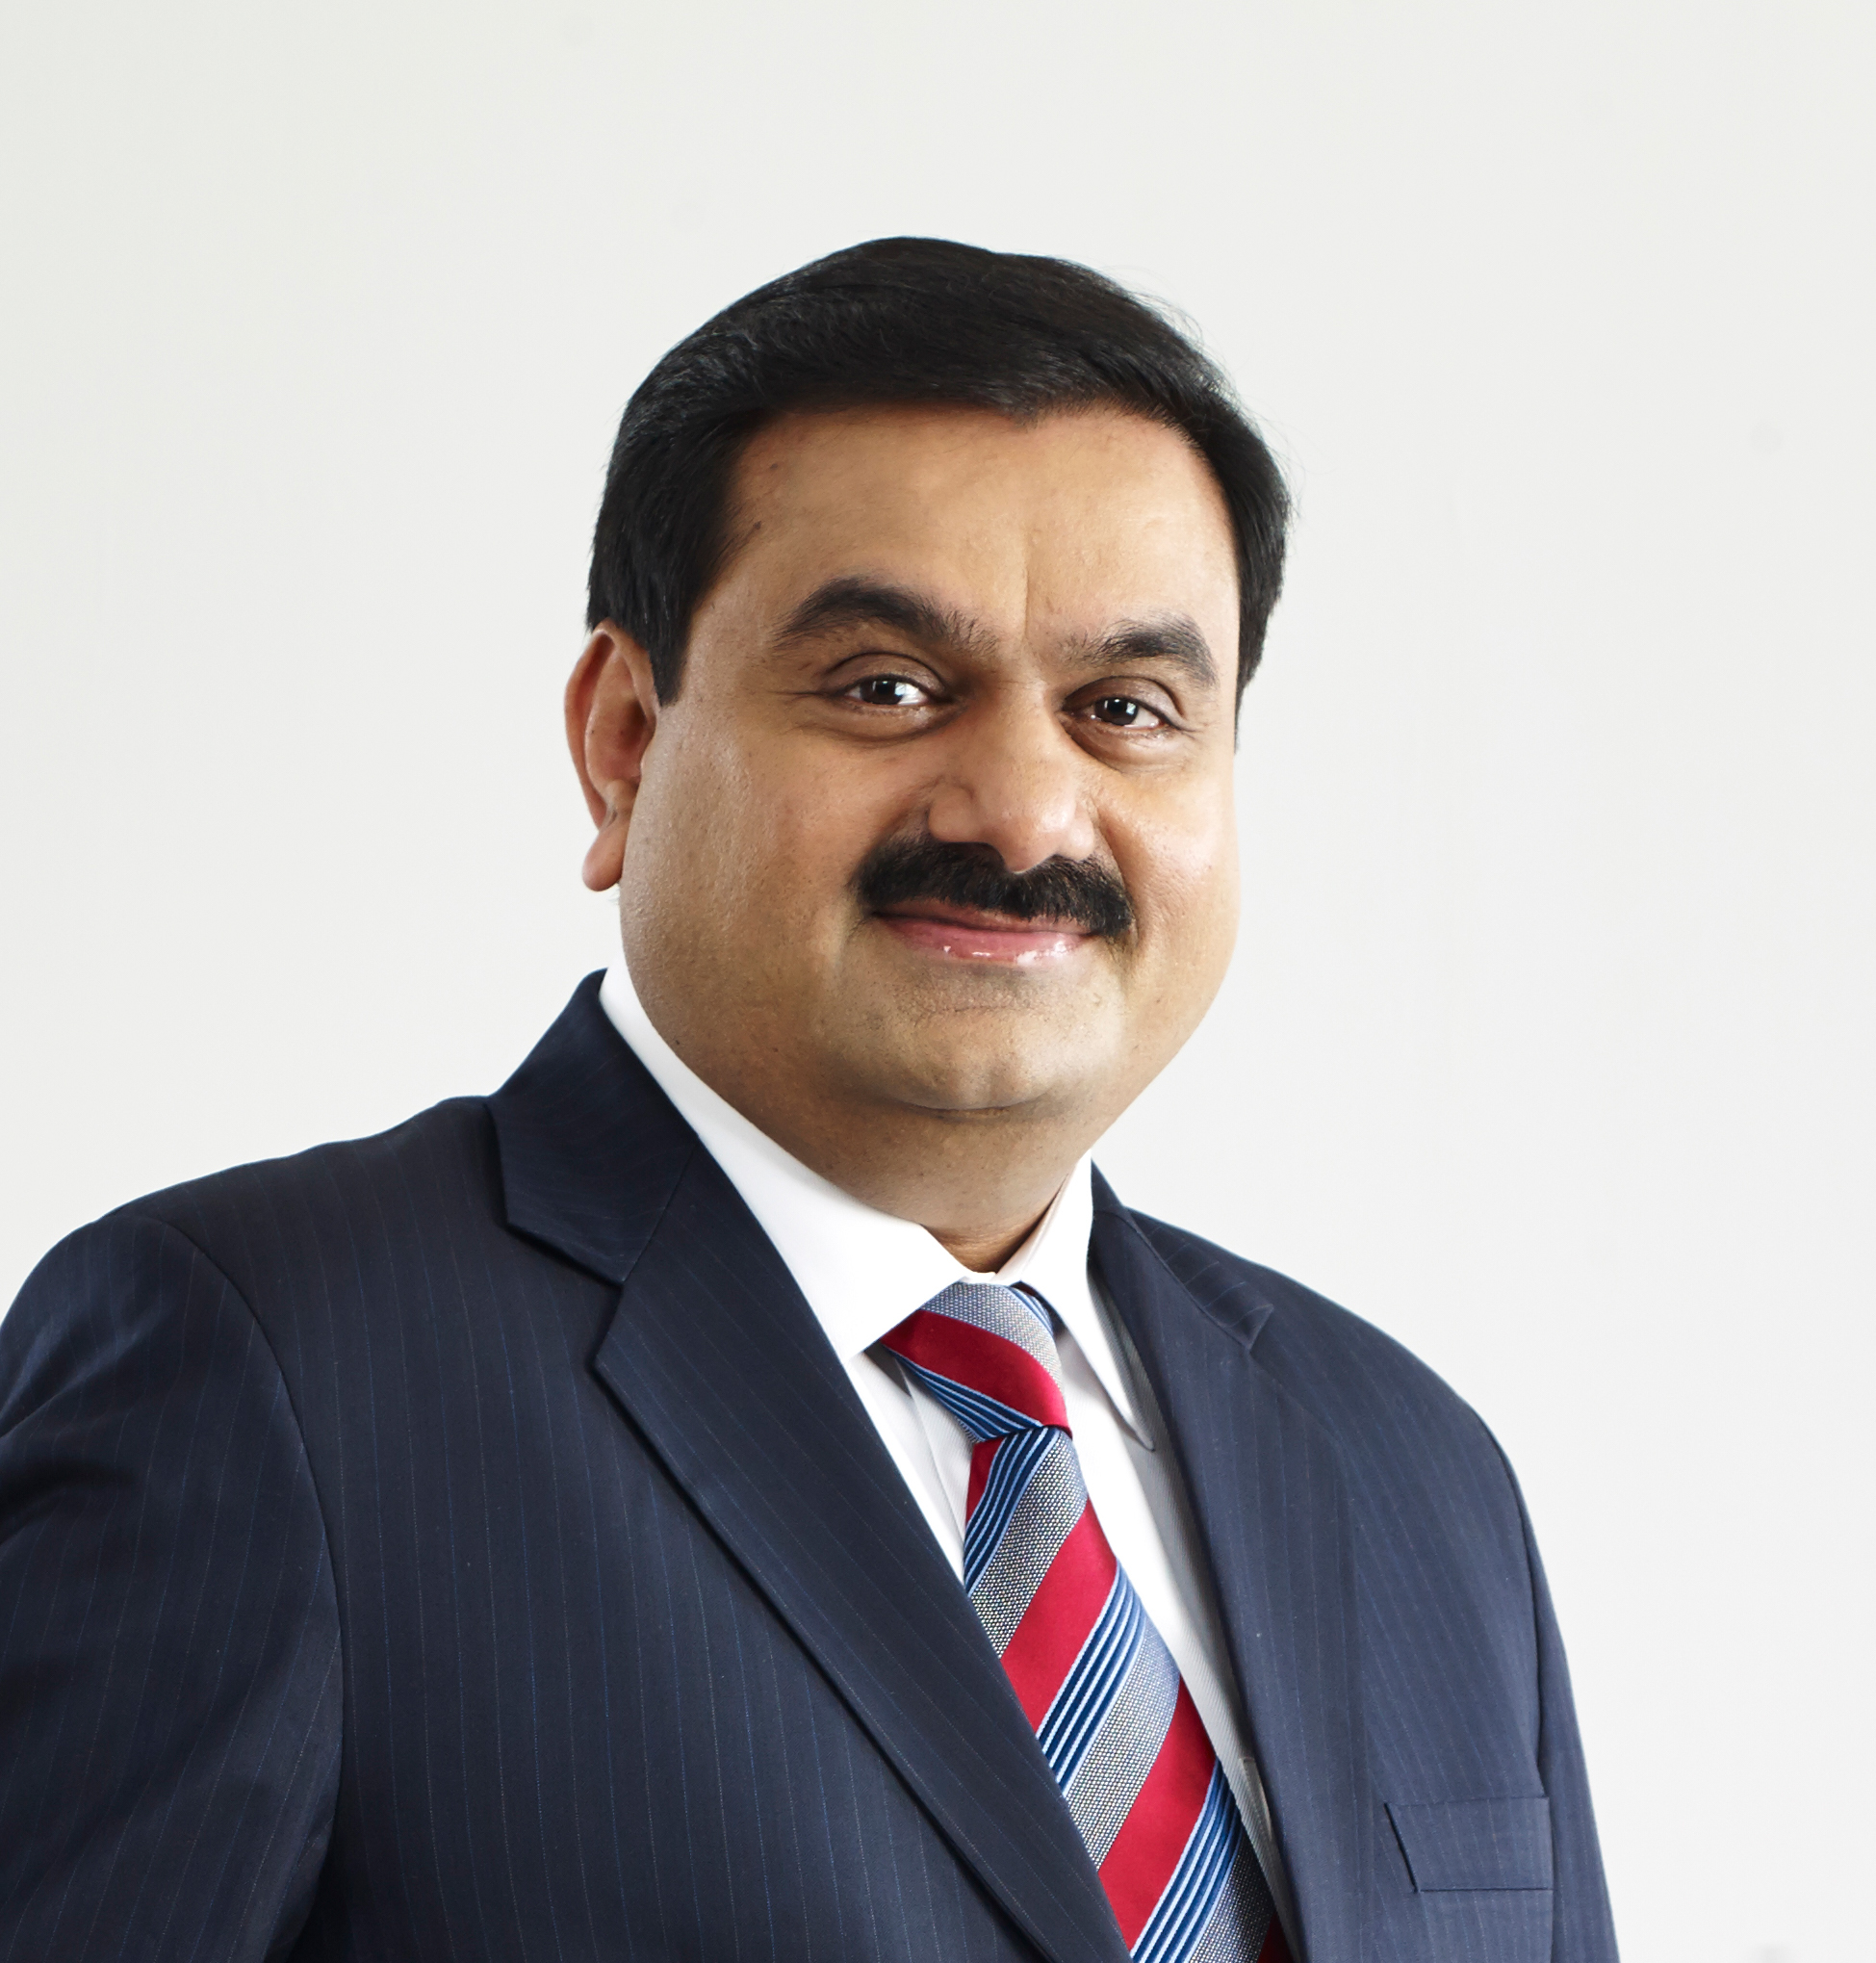 Adani Group, buy food grains,farmers,only manages storage for FCI